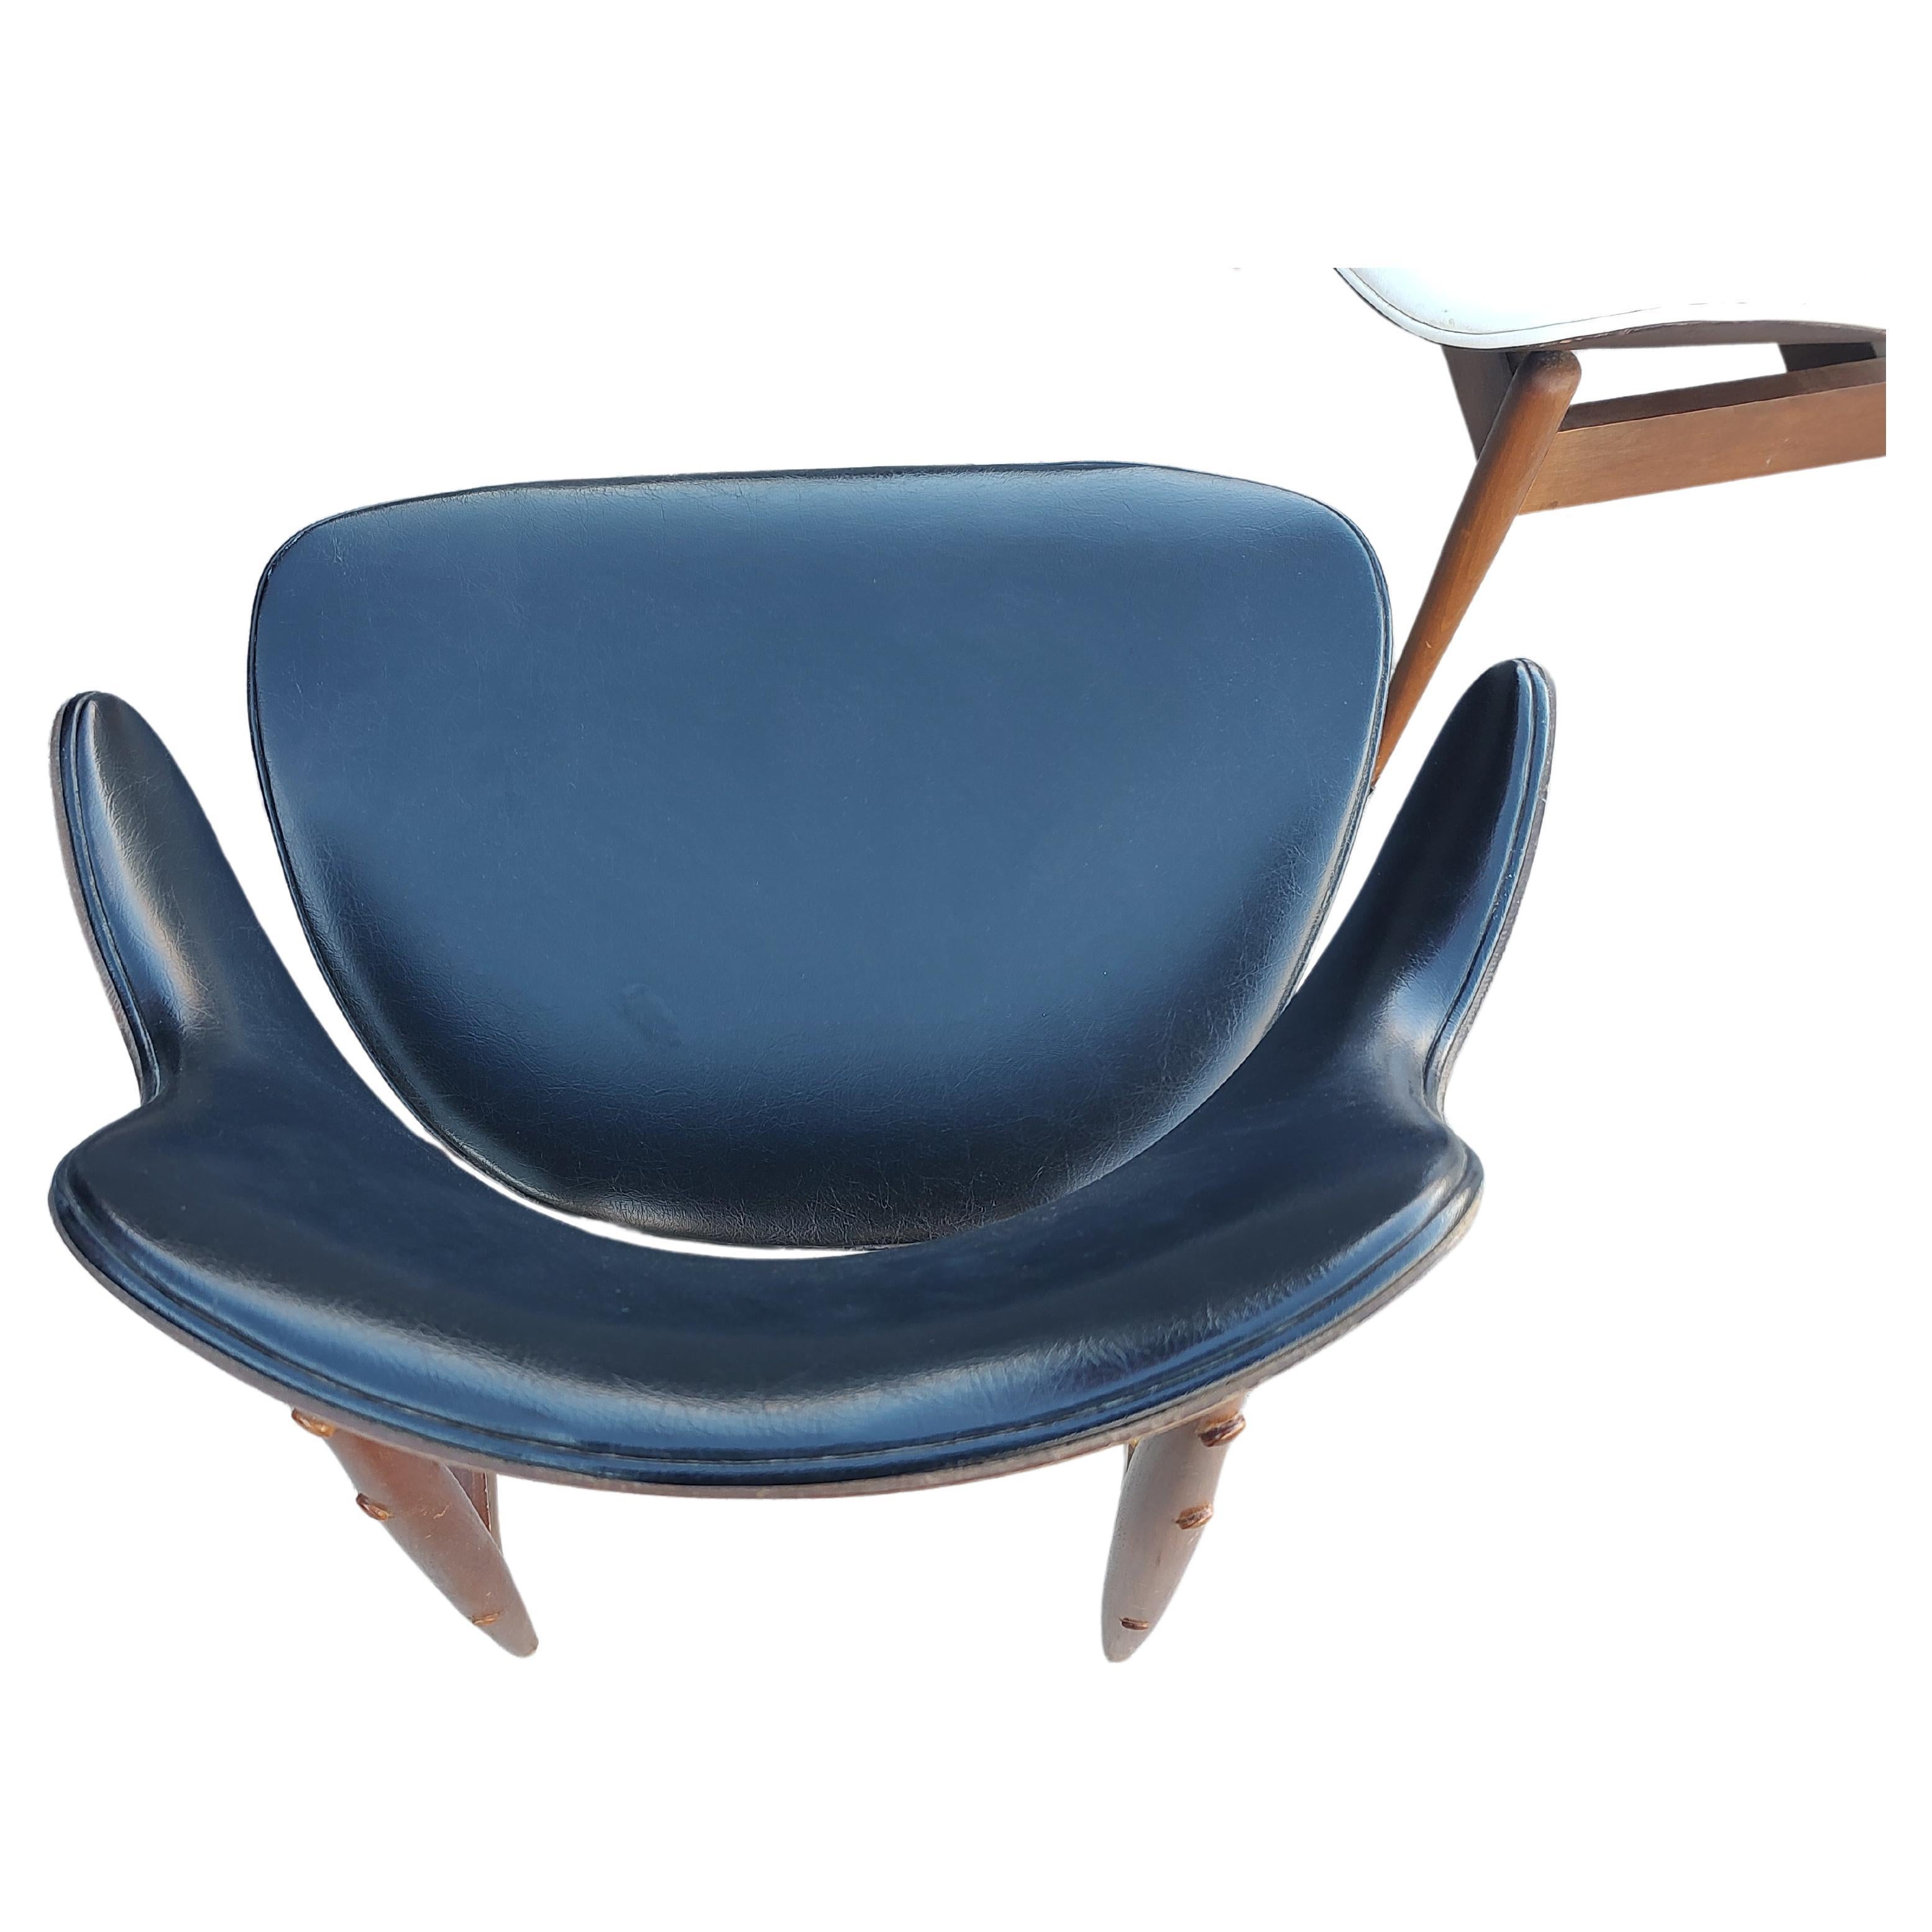 Fantastic pair of Mid Century Modern Sculptural Clam Shell Chairs by Seymour James Wiener. Black & White Naughahyde in excellent vintage condition with a few nicks on the white which we will try to fill.
Sold as a pair